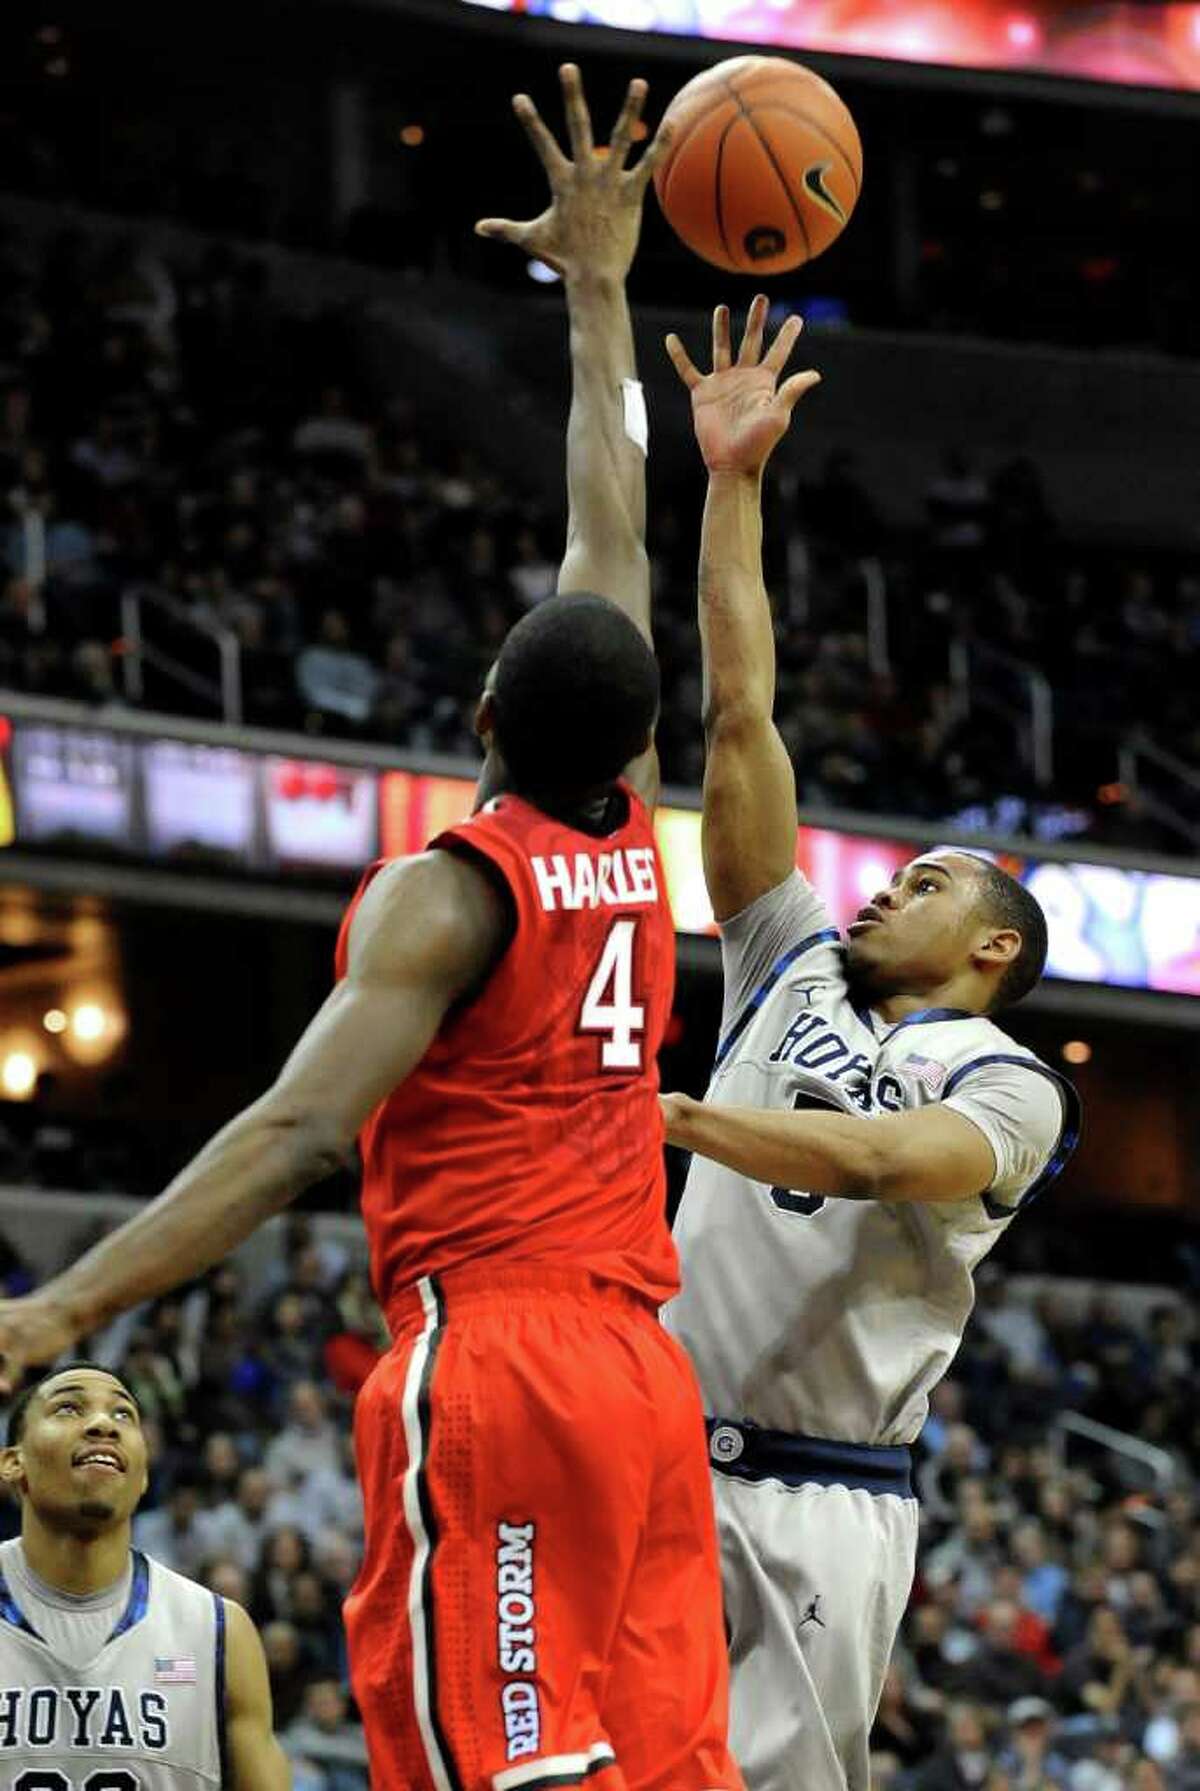 Georgetown's Markel Starks, right, goes up for the shot and two points against the defense of St. John's Moe Harkless (4) during second half of their NCAA college basketball game on Sunday, Feb. 12, 2012, in Washington. Georgetown defeated St. John's 71-61. (AP Photo/Richard Lipski)